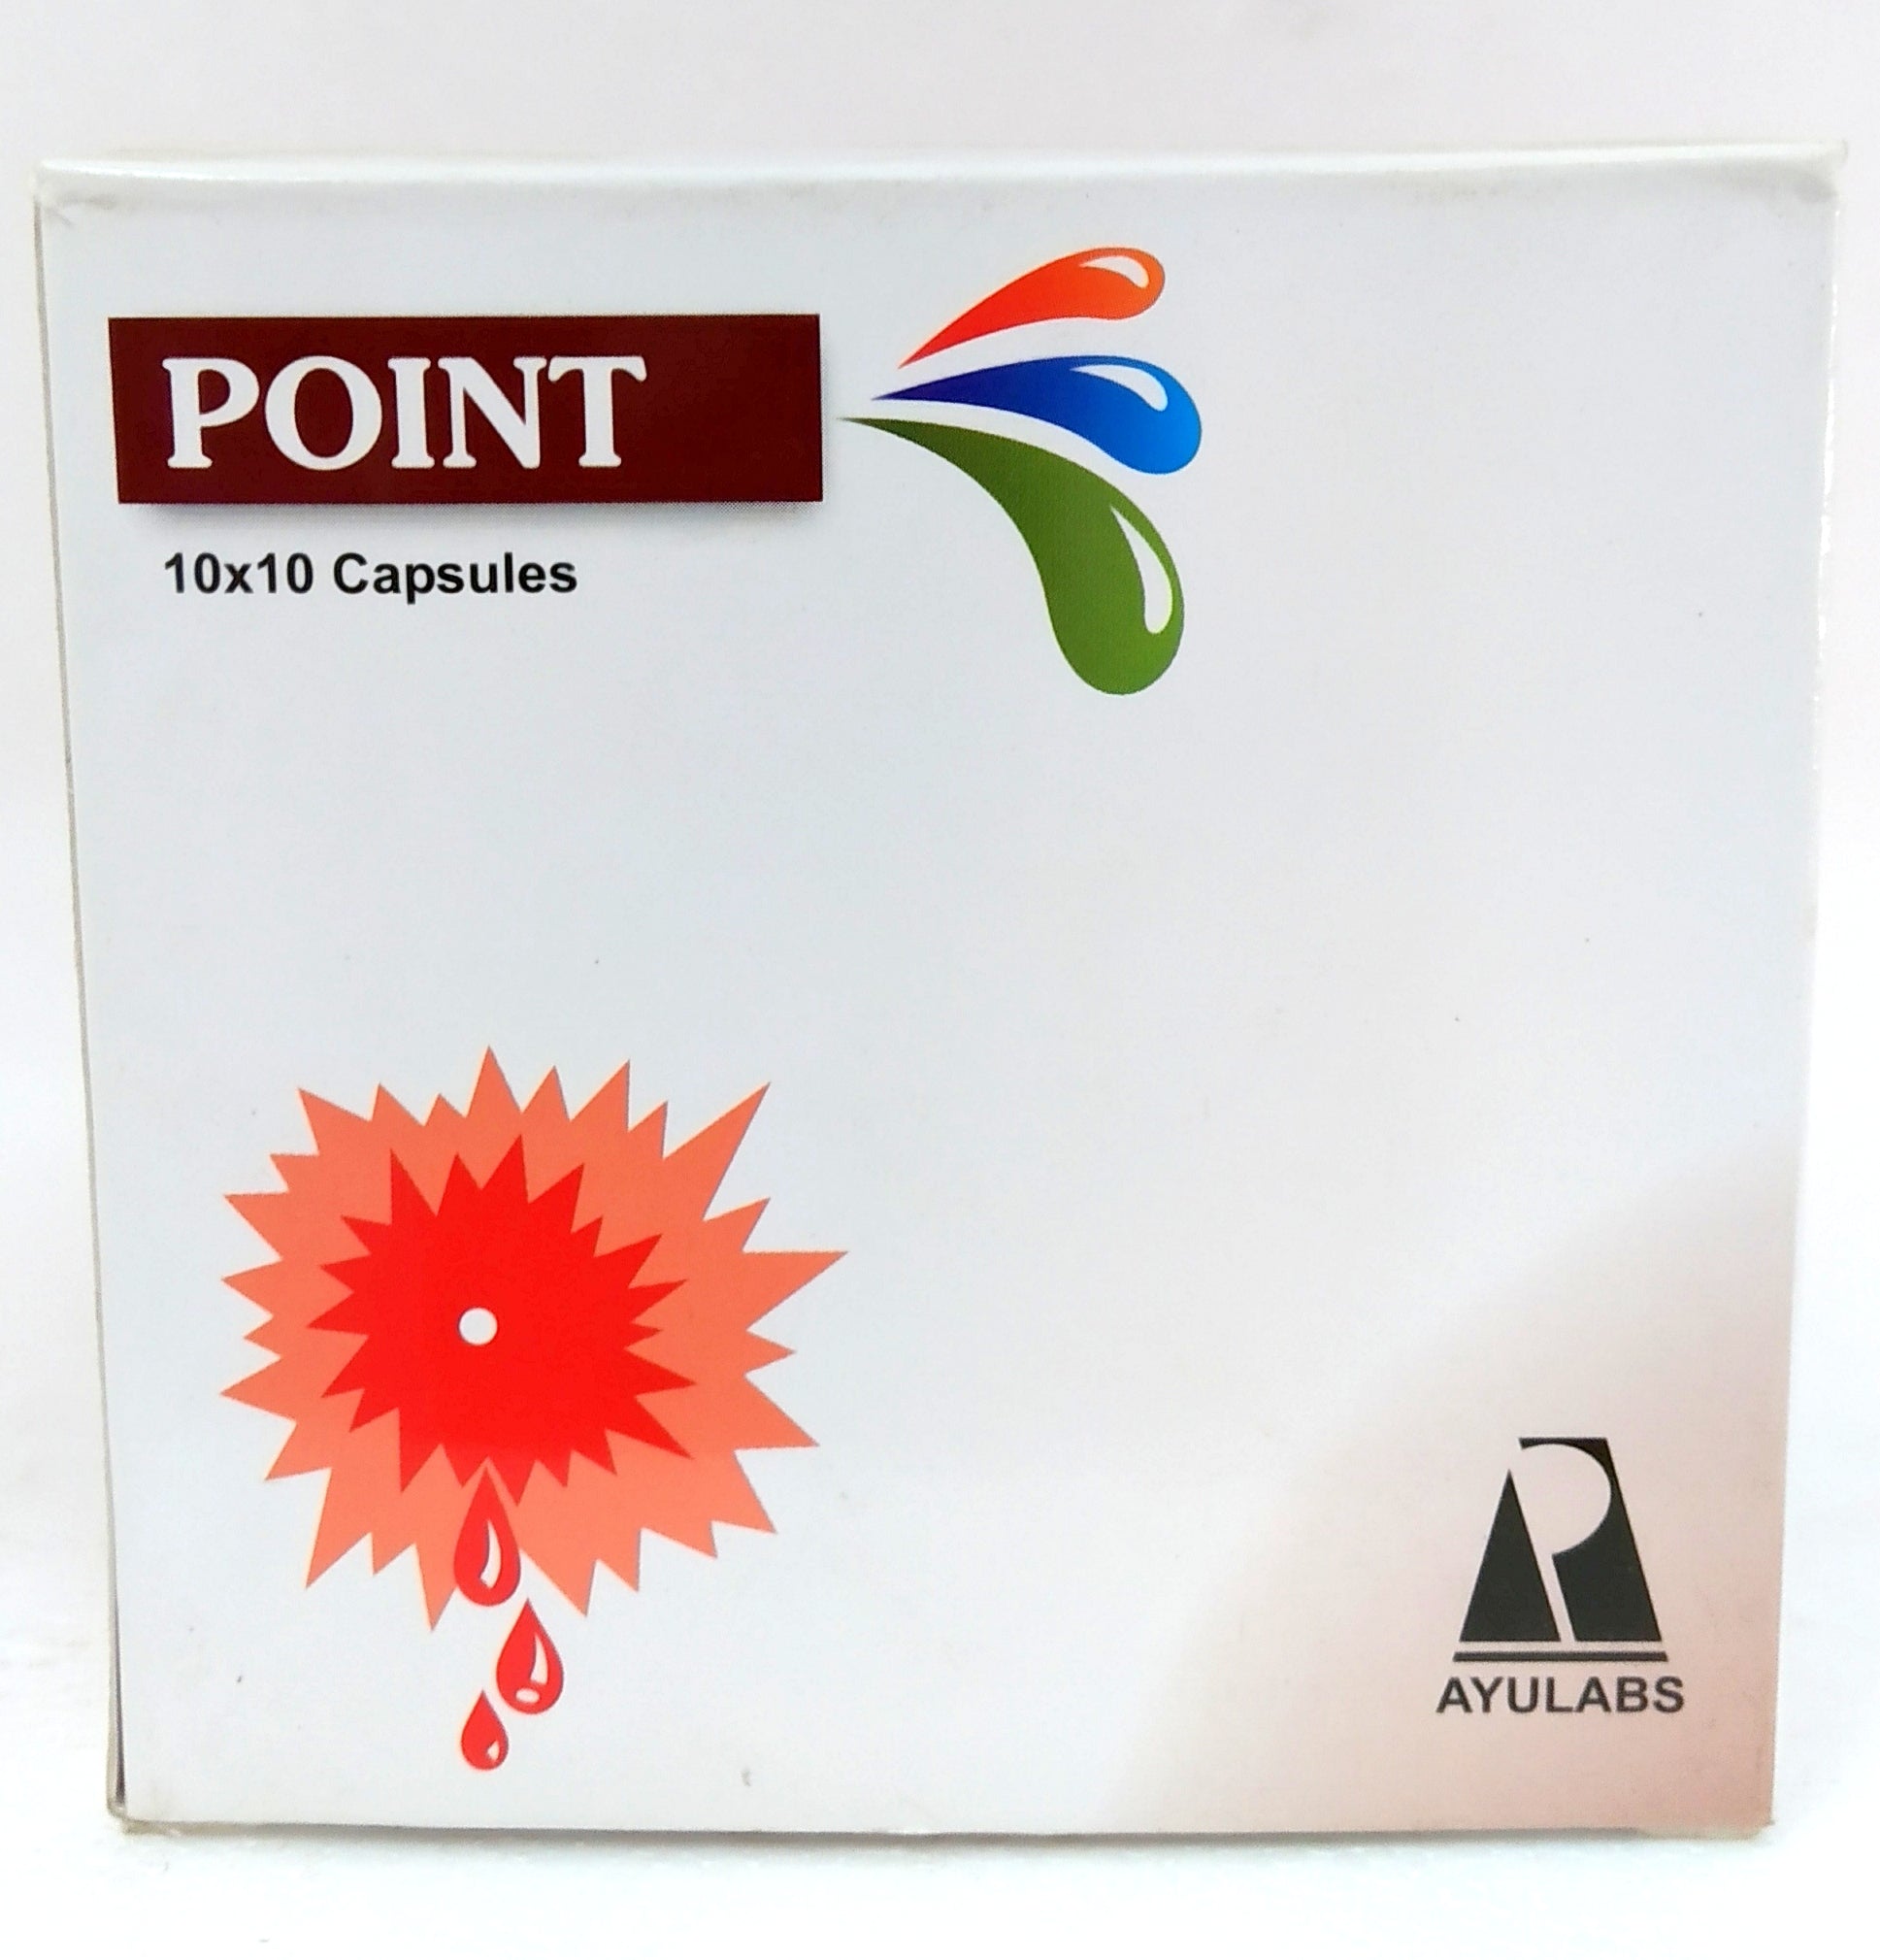 Shop Point 10Capsules at price 50.00 from Ayulabs Online - Ayush Care